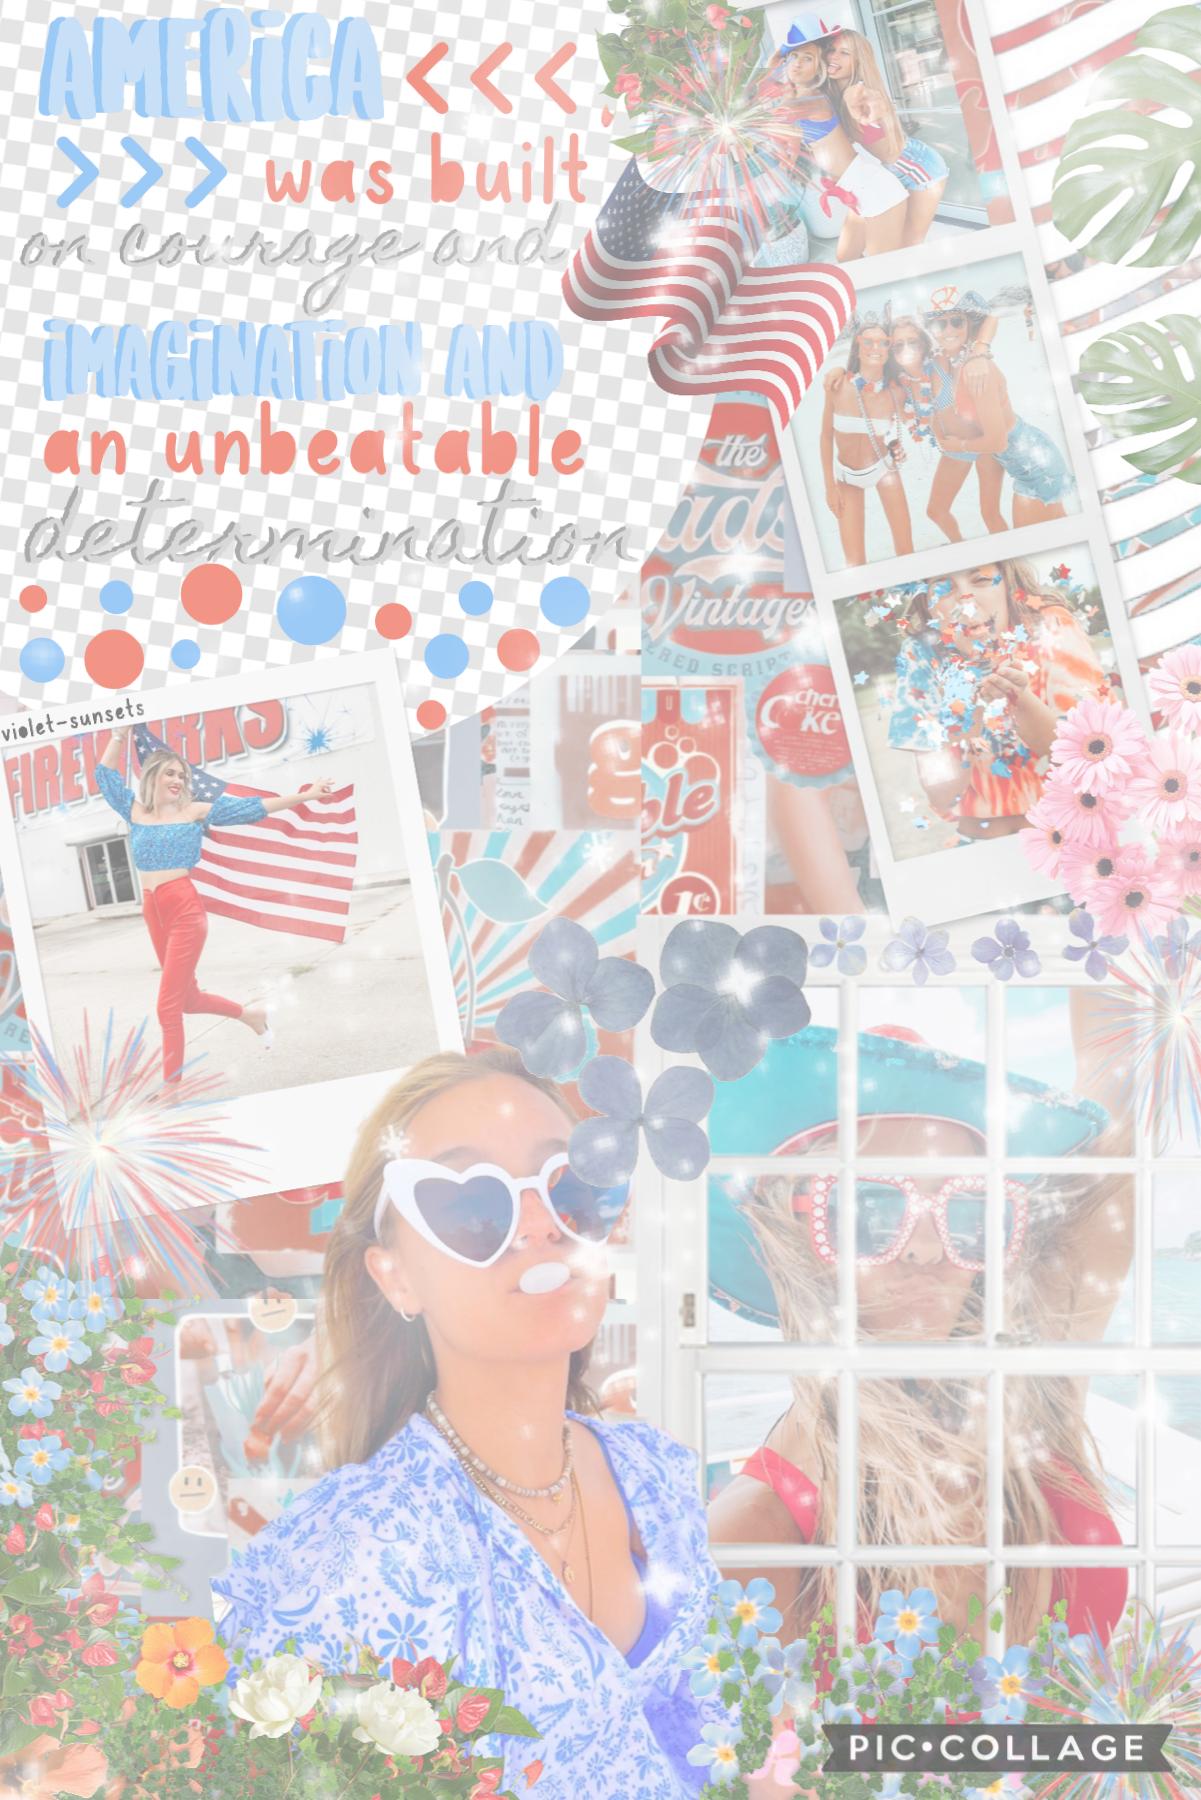 🇺🇸7/3/22🇺🇸 tap!
happy 4th!! ik it's not the 4th yet but i most likely won't be posting tmrw so i just planned ahead and made this!! qotd: are you doing anything for the 4th of july? me: i'm watching fireworks and getting shaved ice!!